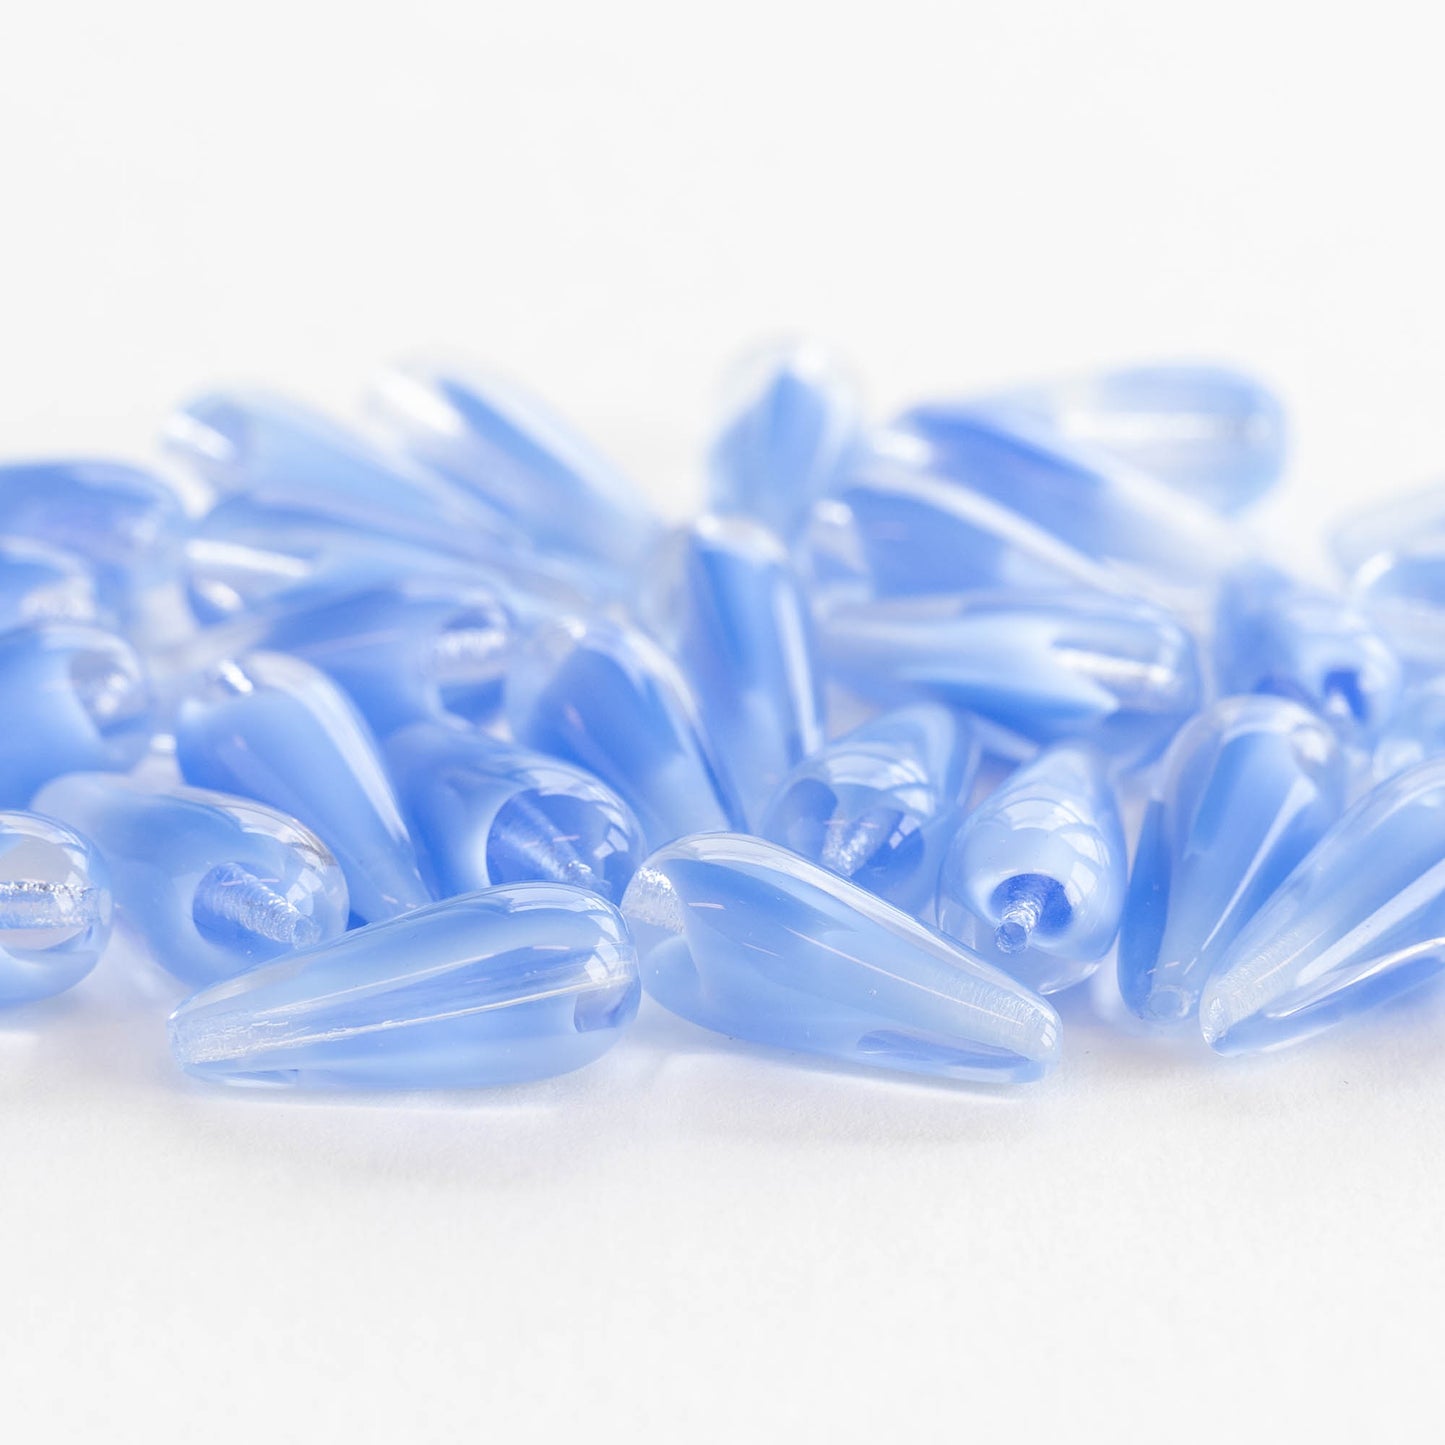 9x20mm Long Drilled Drops - Sky Blue Marble - 20 Beads